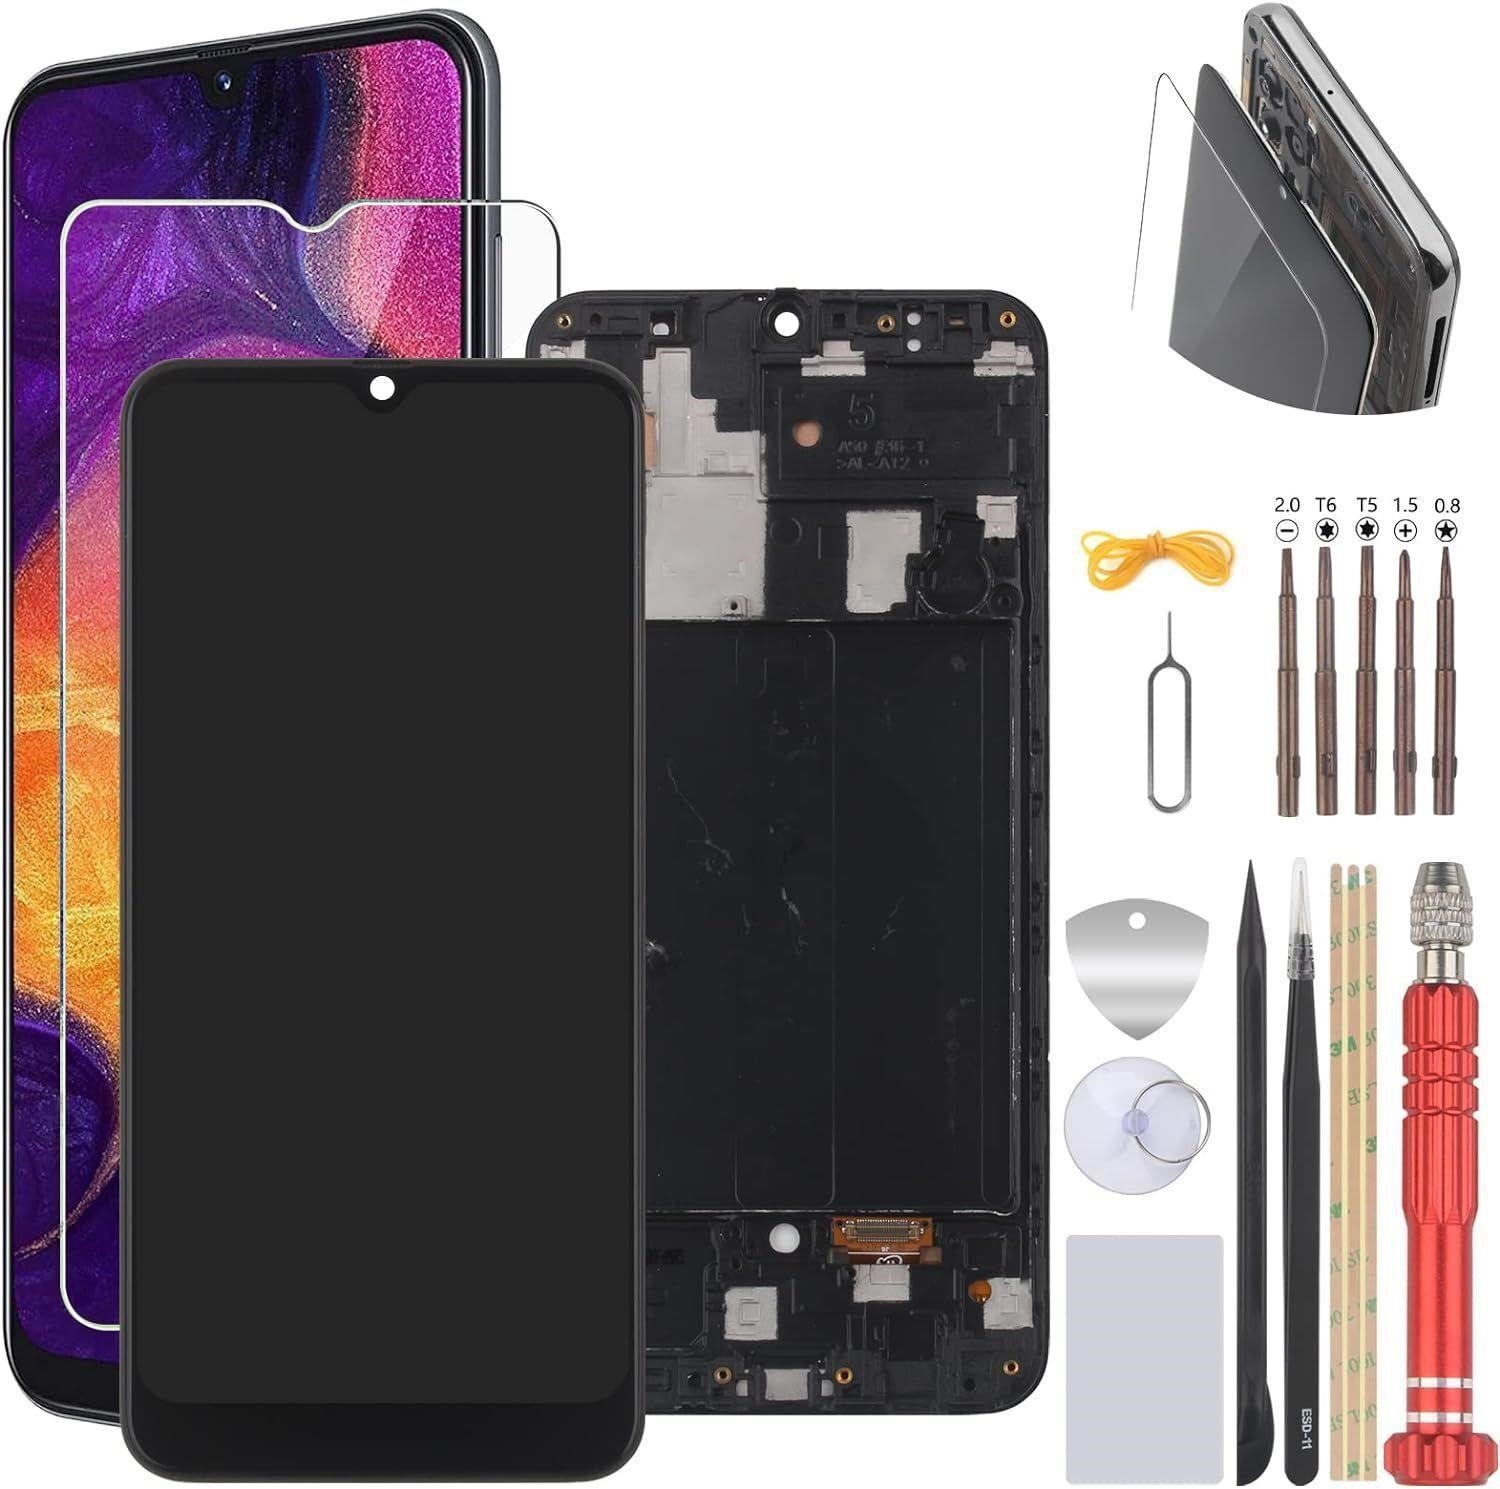 NEW $40 Replacement Screen For Samsung Galaxy A50